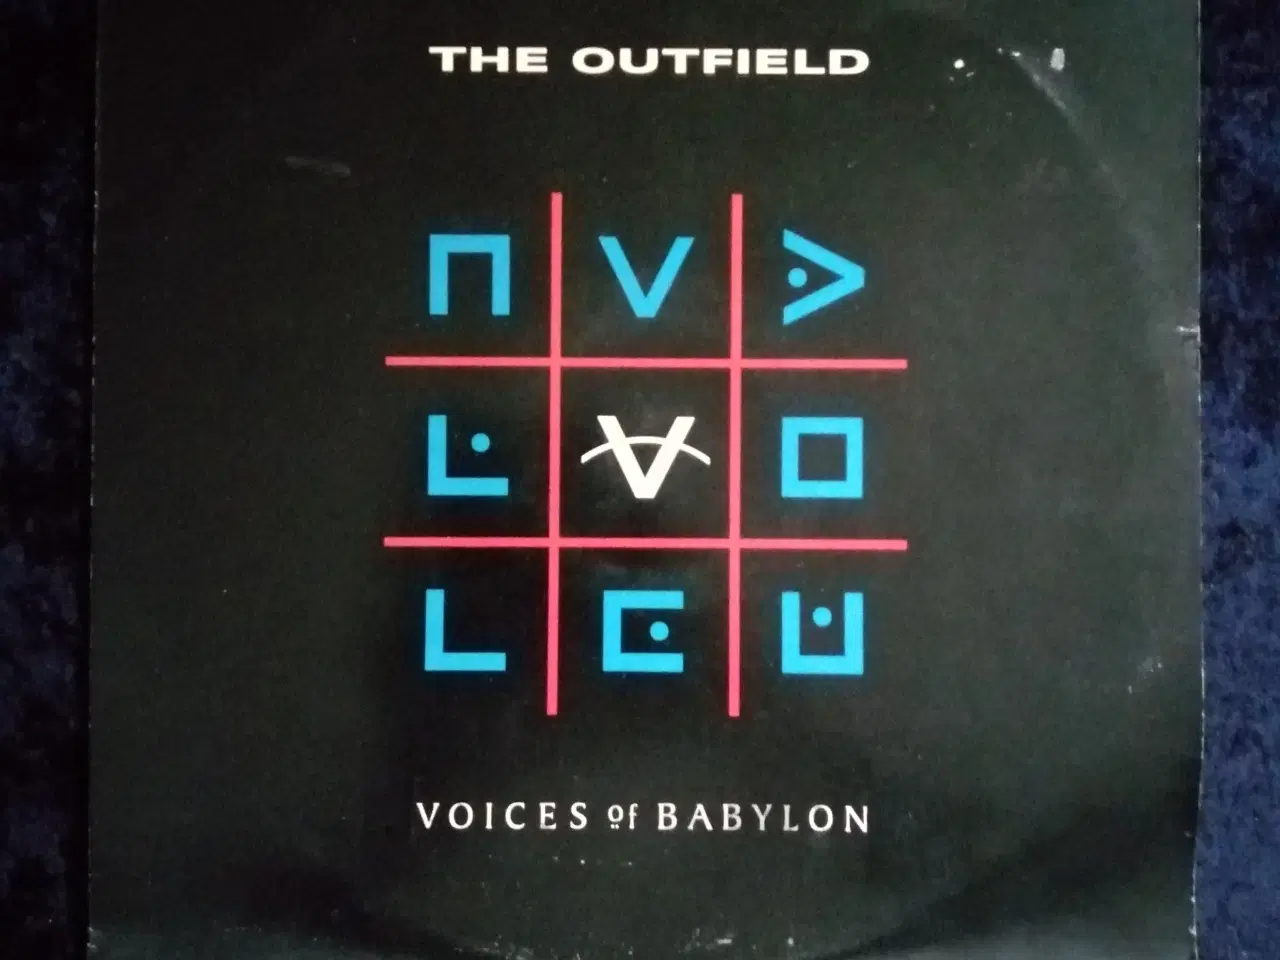 Billede 1 - The Outfield: Voices of Babylon